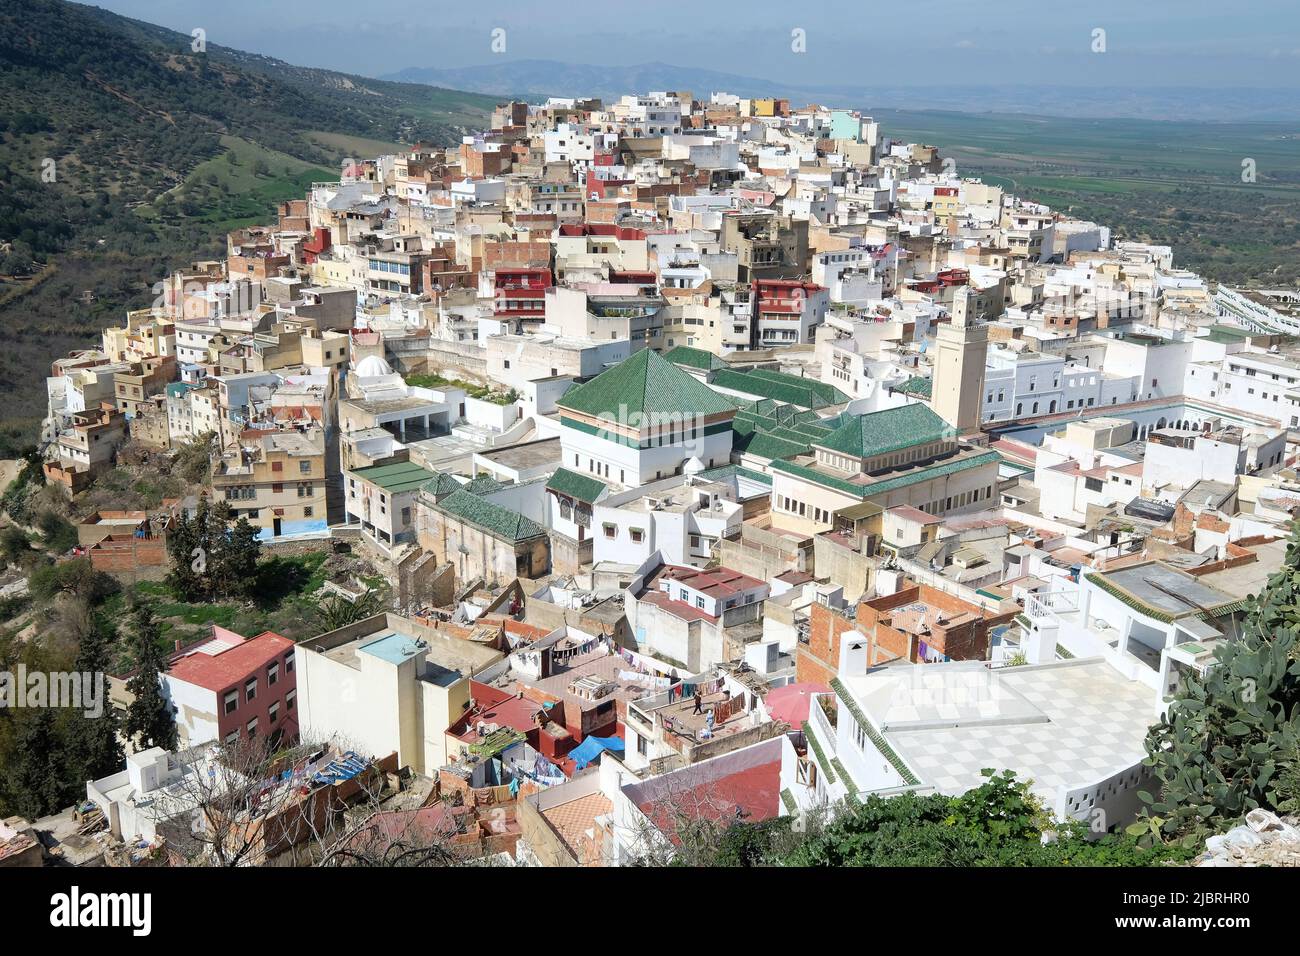 View of the green tiled roofs of the holy city of Moulay Idris, Morocco including the tomb and Zawiya of Moulay Idriss, Middle Atlas, North Africa. Stock Photo